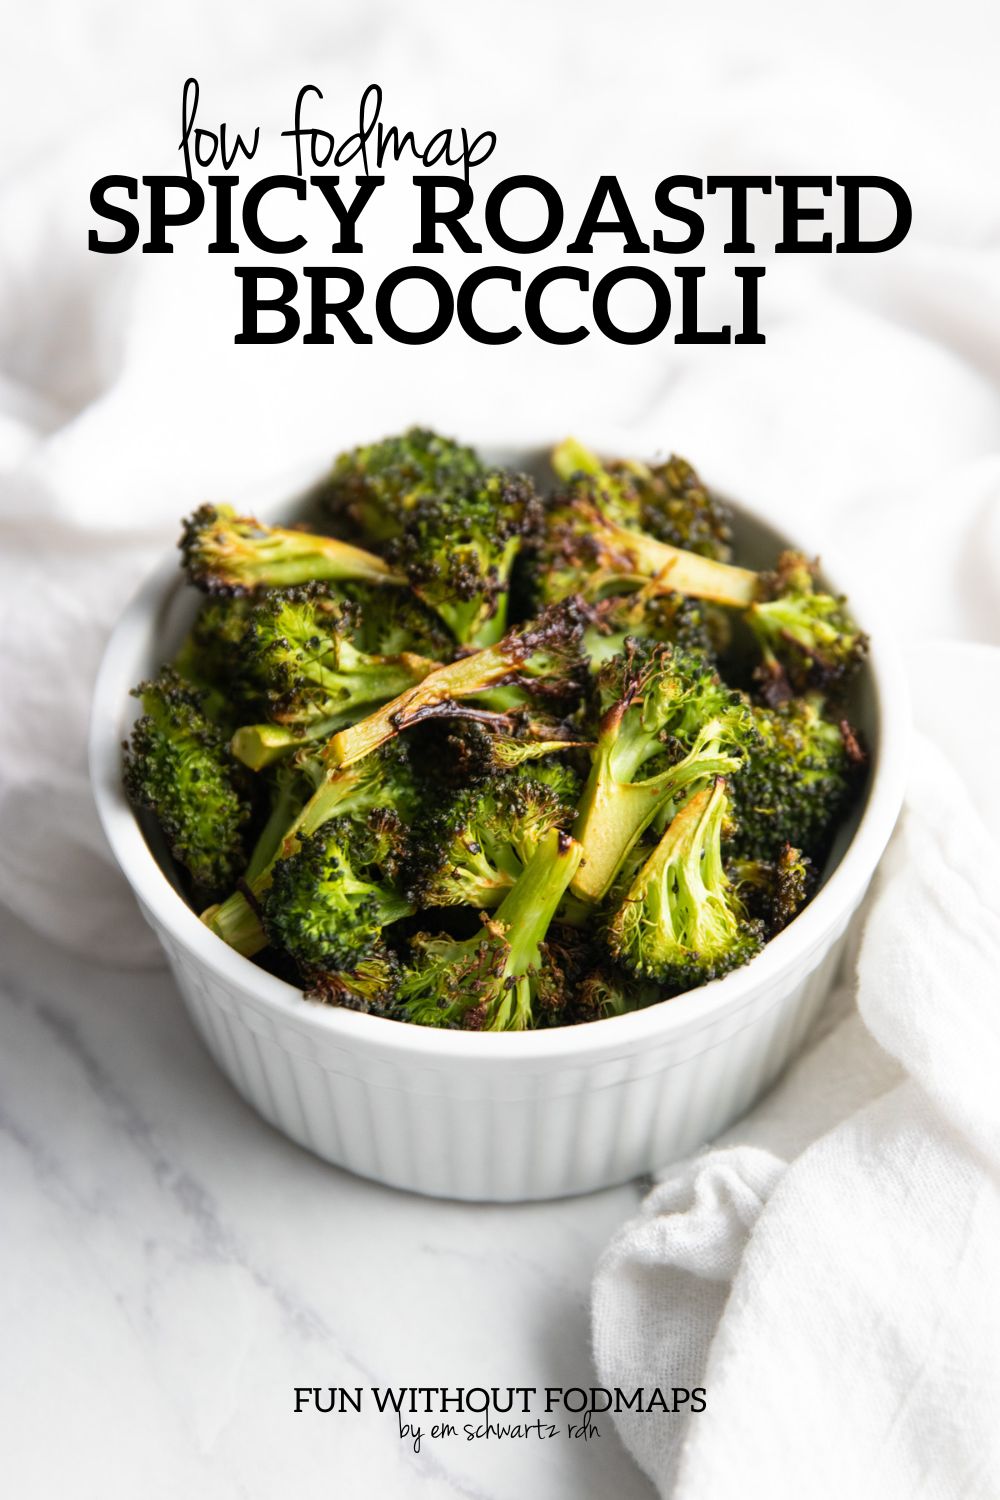 A small bowl of roasted broccoli. In the white space above, black text reads "Low FODMAP Spicy Roasted Broccoli".